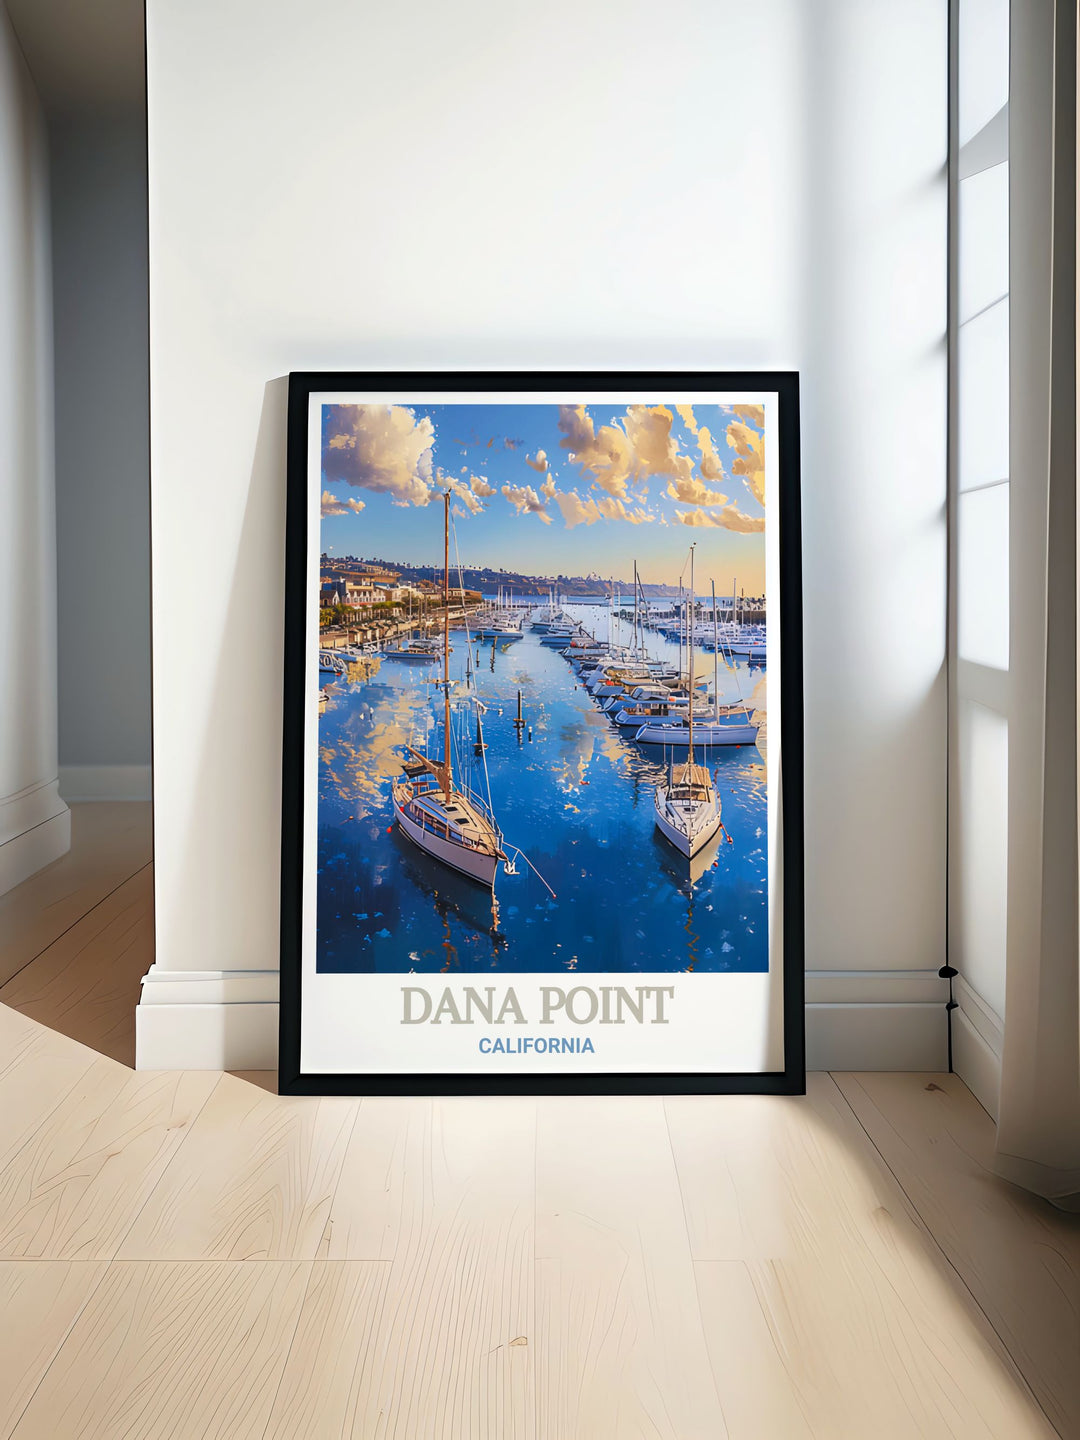 Dana Point Harbor travel poster showcasing the vibrant marina and scenic coastline of California. Perfect for California travel enthusiasts and art collectors this vintage print brings the beauty of Dana Point Harbor into your home decor.